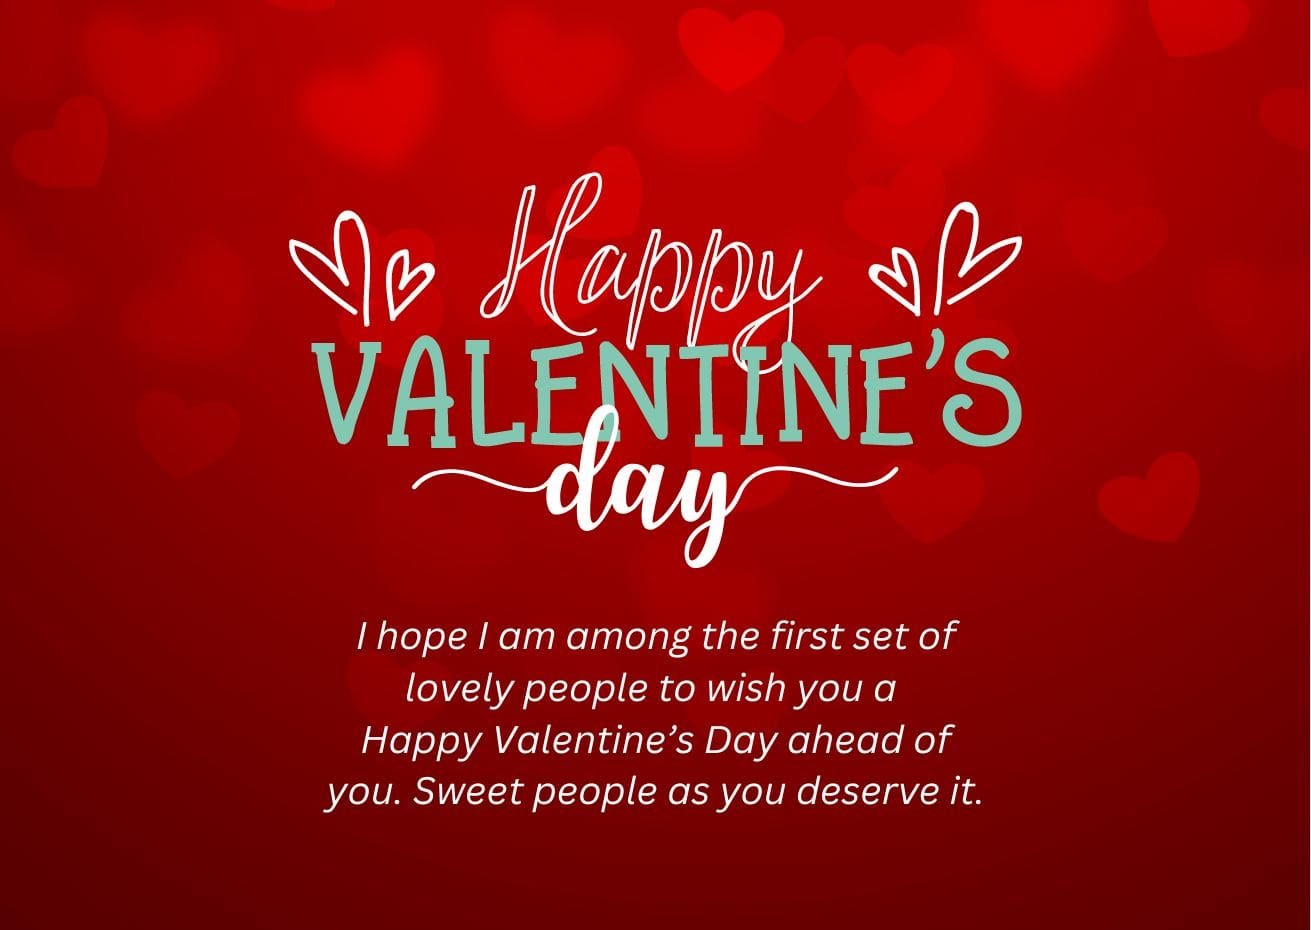 Read more about the article 200+ Advance Happy Valentine’s Day Wishes and Quotes (Romantic)